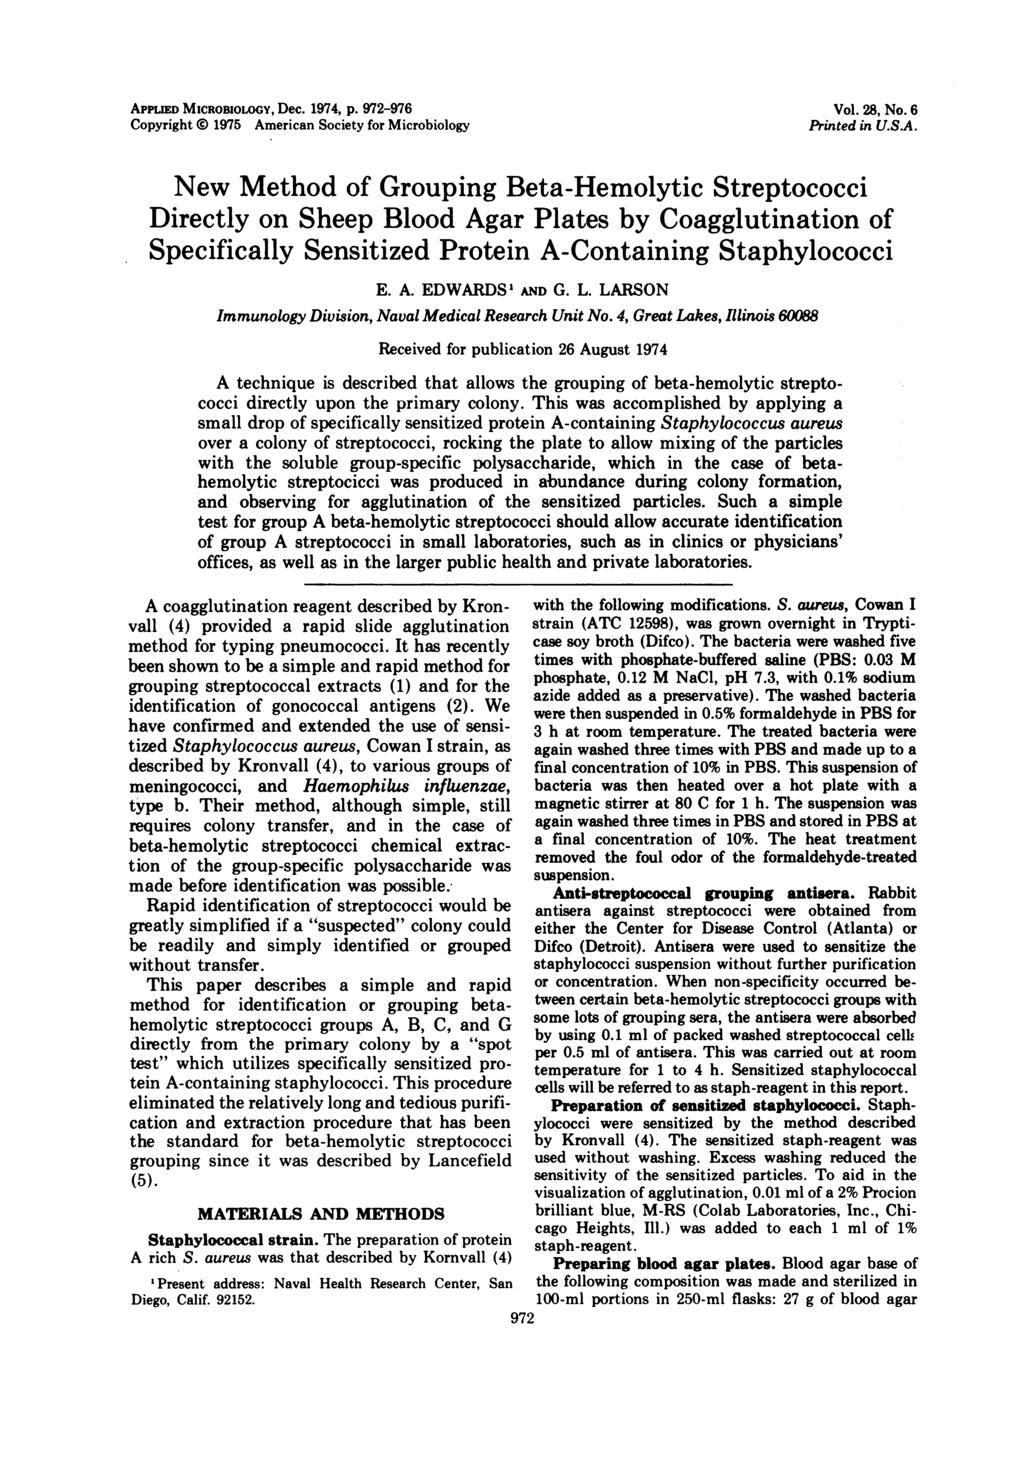 APPLIED MICROBIOLOGY, Dec. 1974, p. 972-976 Copyright 0 1975 American Society for Microbiology Vol. 28, No. 6 Printed in U.S.A. New Method of Grouping Beta-Hemolytic Streptococci Directly on Sheep Blood Agar Plates by Coagglutination of Specifically Sensitized Protein A-Containing Staphylococci E.